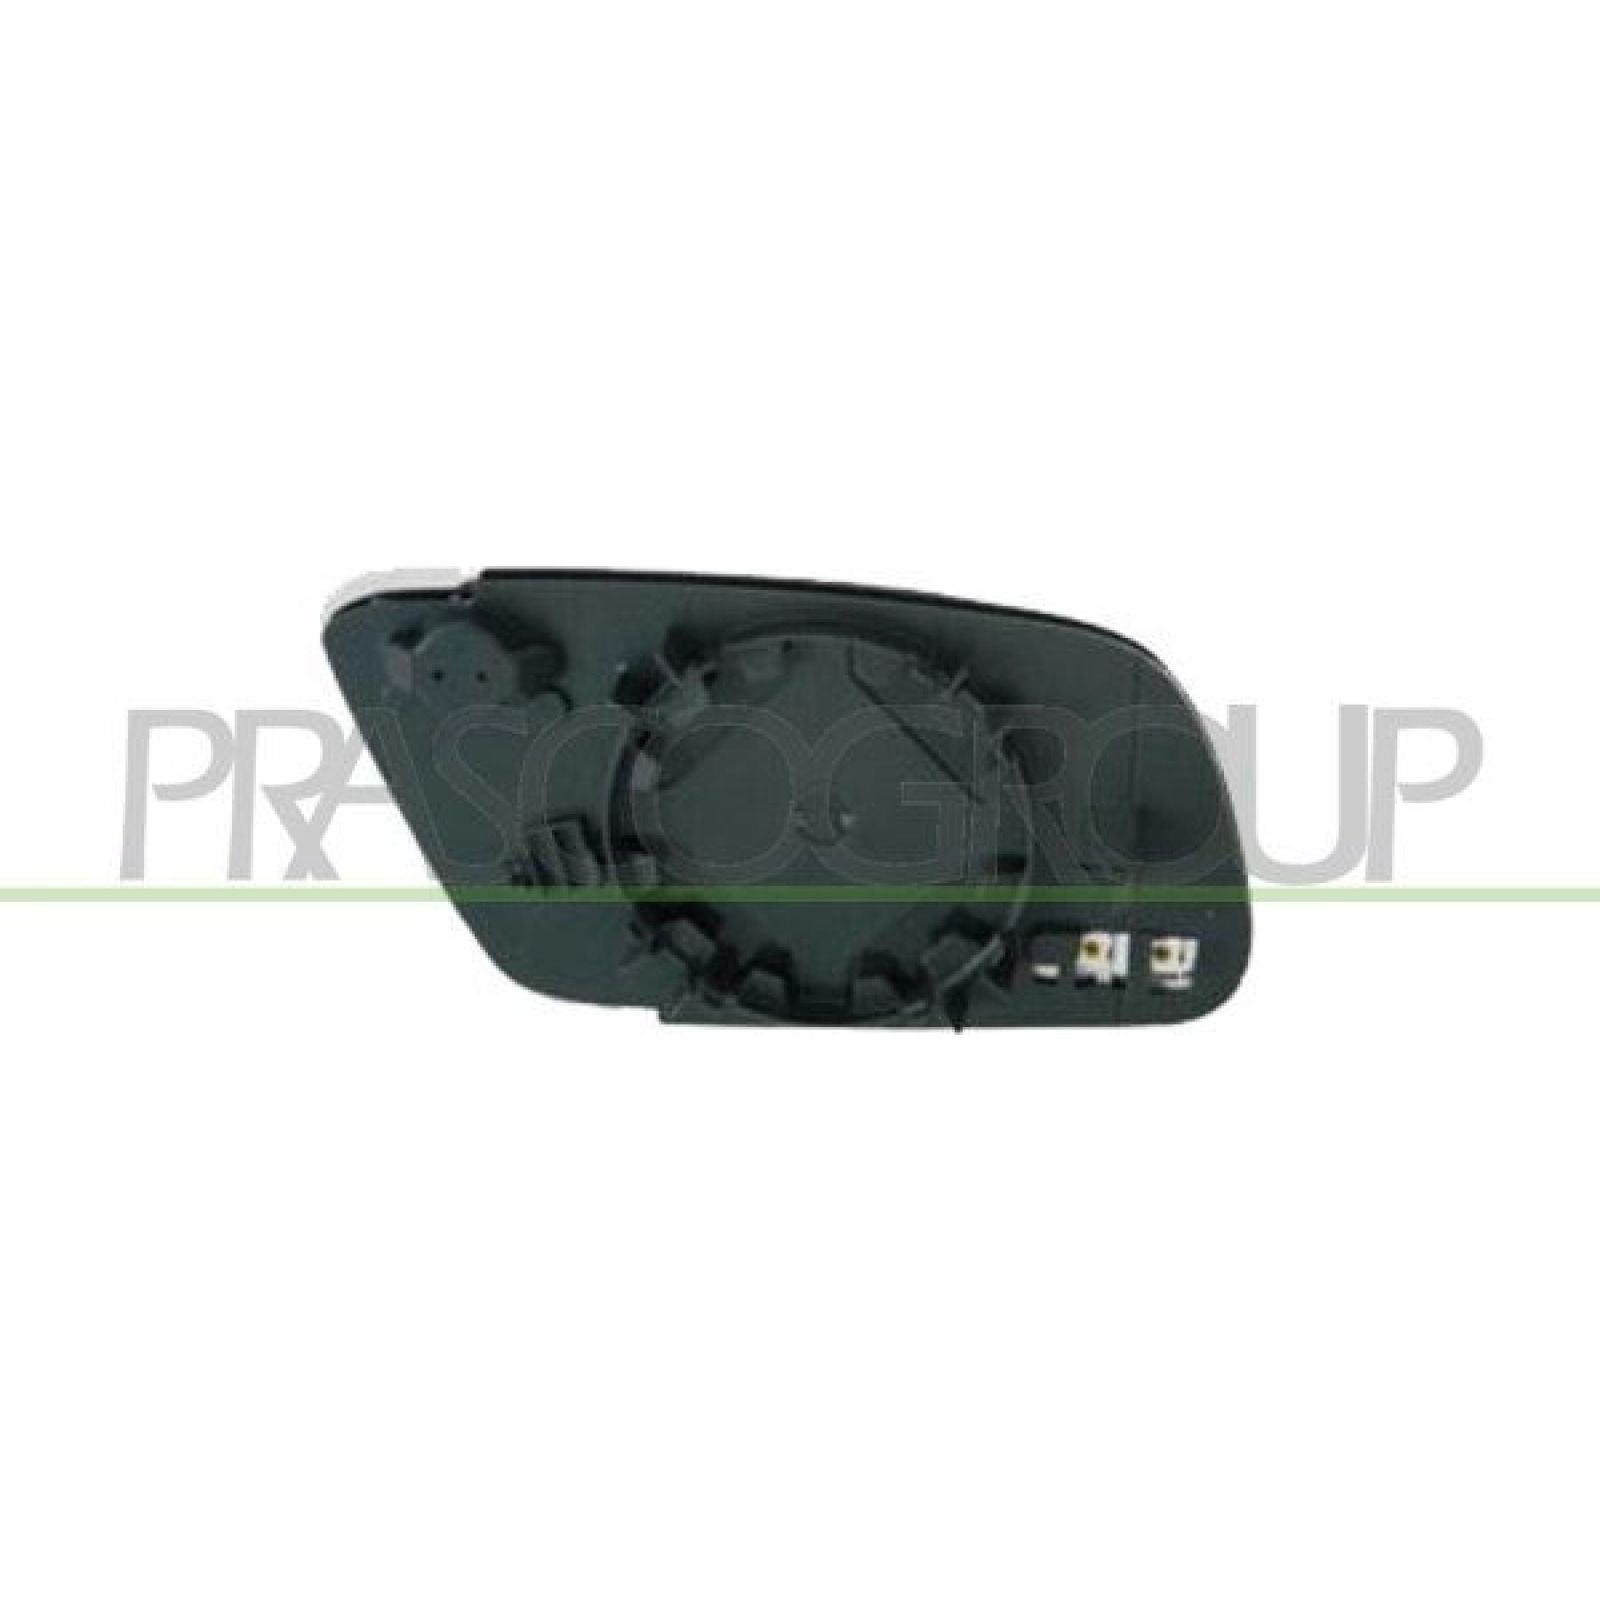 https://www.autoteile-store.at/img/product/spiegelglas-l-hzb-asph-blau-audi-a3-900-503a4-299-901-13157303-17407/1c63d2b9460c84a1619af998162055fb_1600.jpg